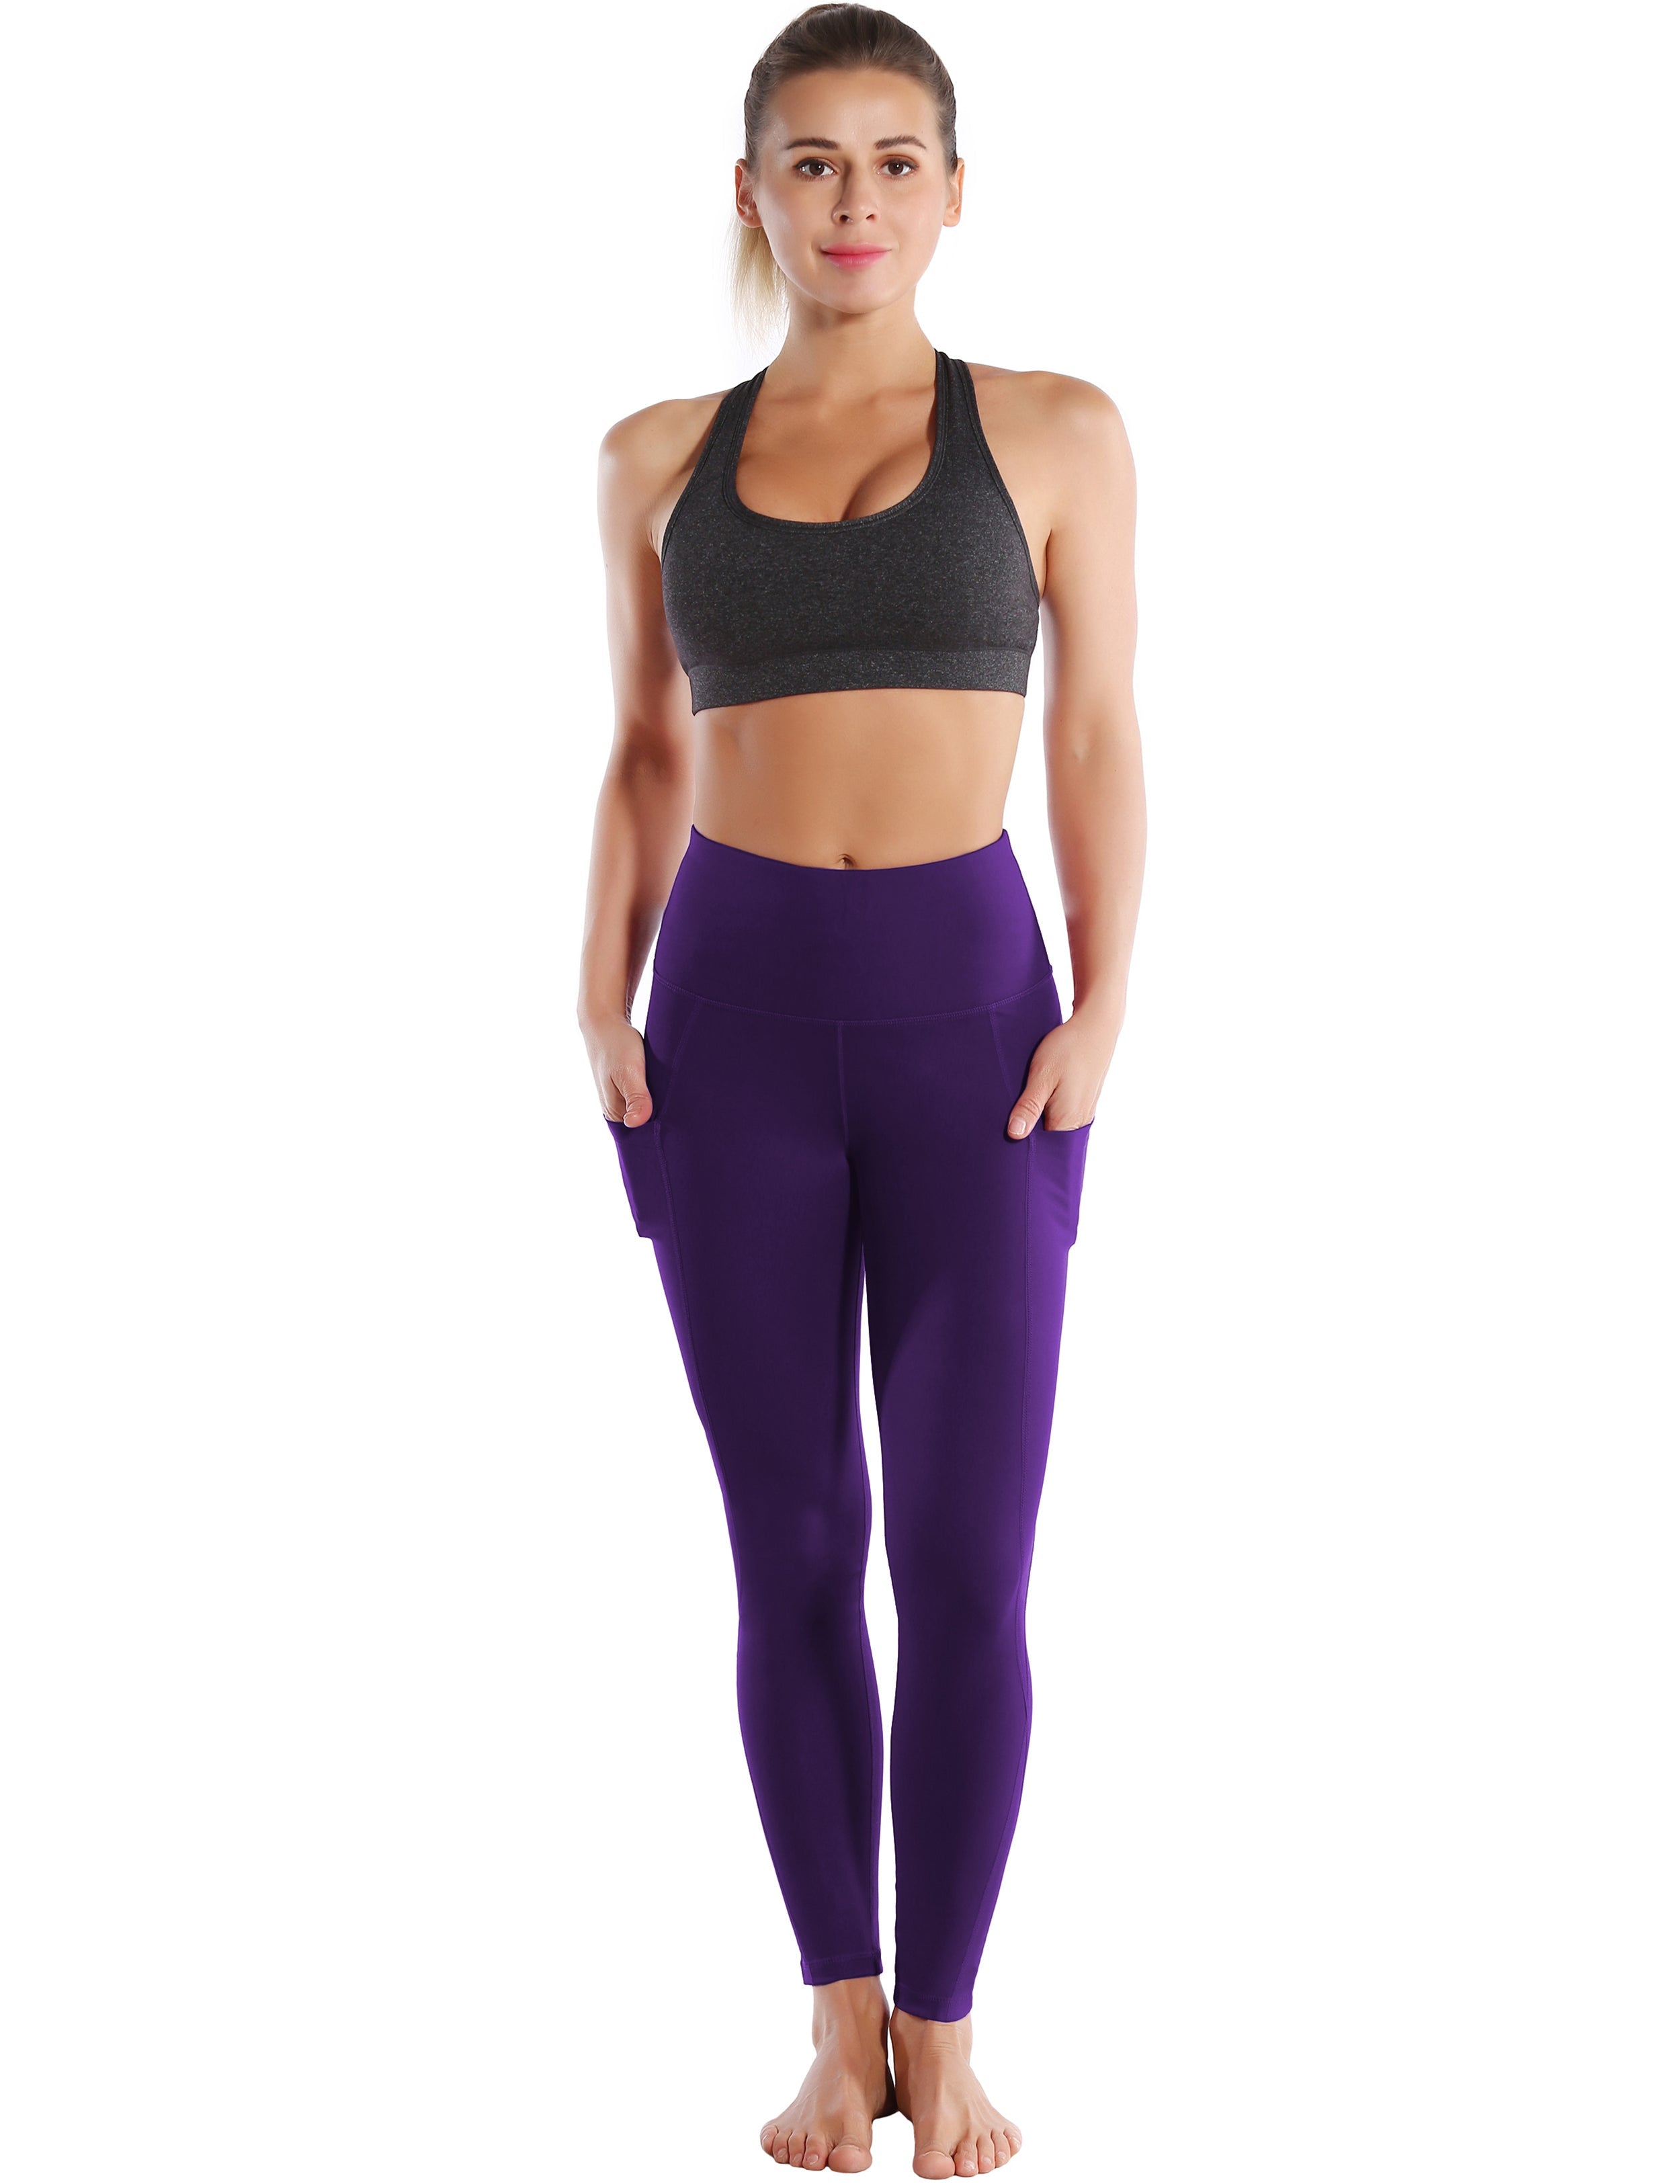 High Waist Side Pockets Pilates Pants grapevine 75% Nylon, 25% Spandex Fabric doesn't attract lint easily 4-way stretch No see-through Moisture-wicking Tummy control Inner pocket